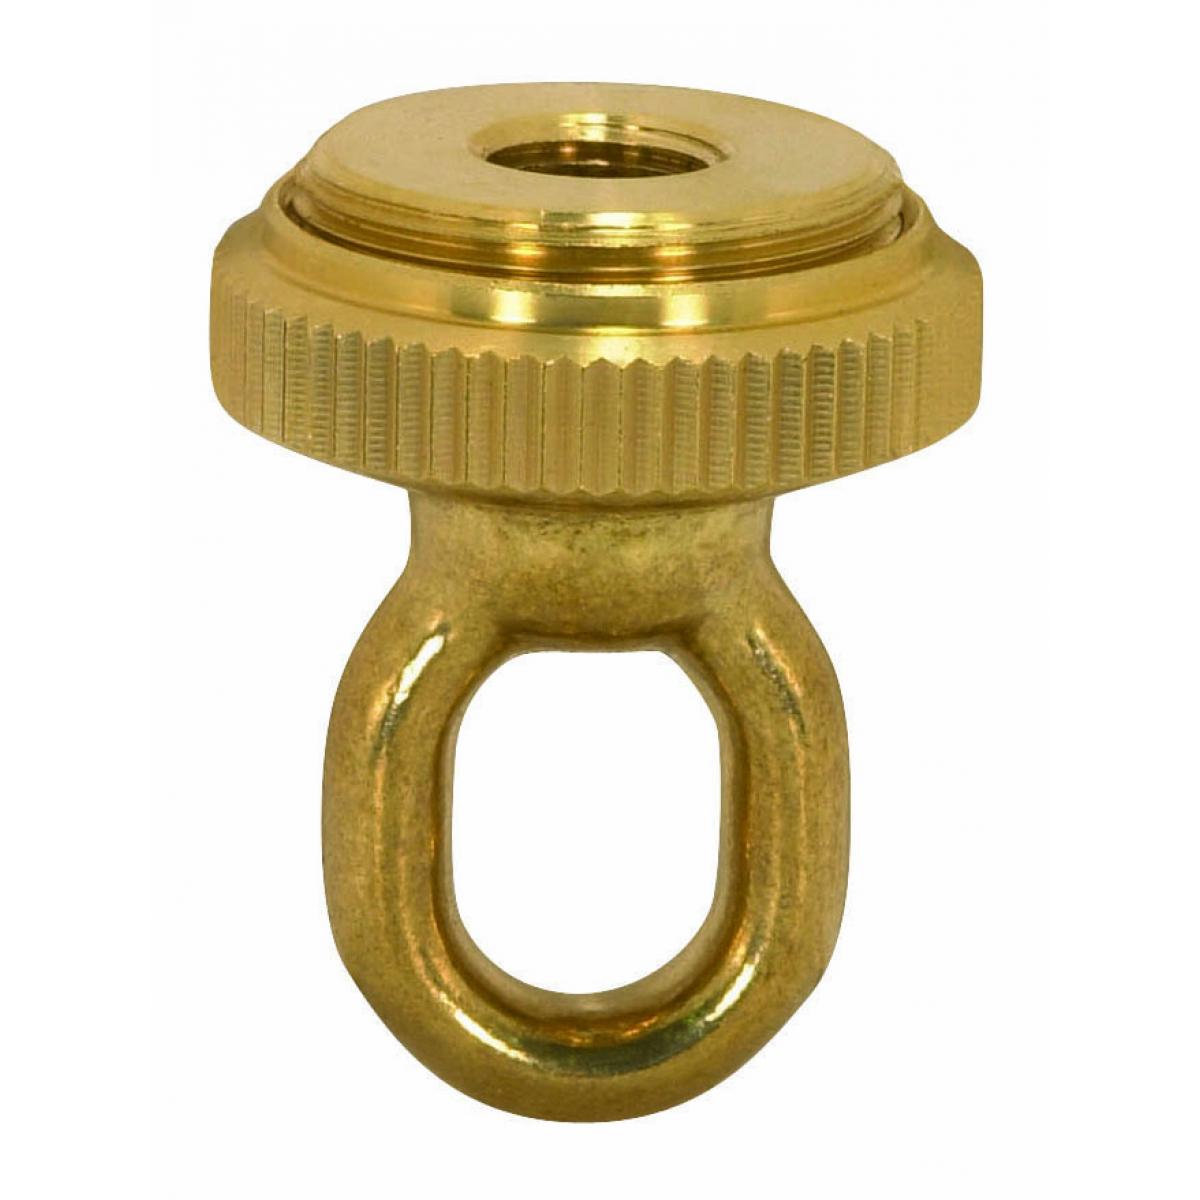 Satco 90-2298 1/4 IP Heavy Duty Cast Brass Screw Collar Loops with Ring 1/4 IP Fits 1-1/4" Canopy Hole Ring Diameter 1-5/8" Height 2-1/4"